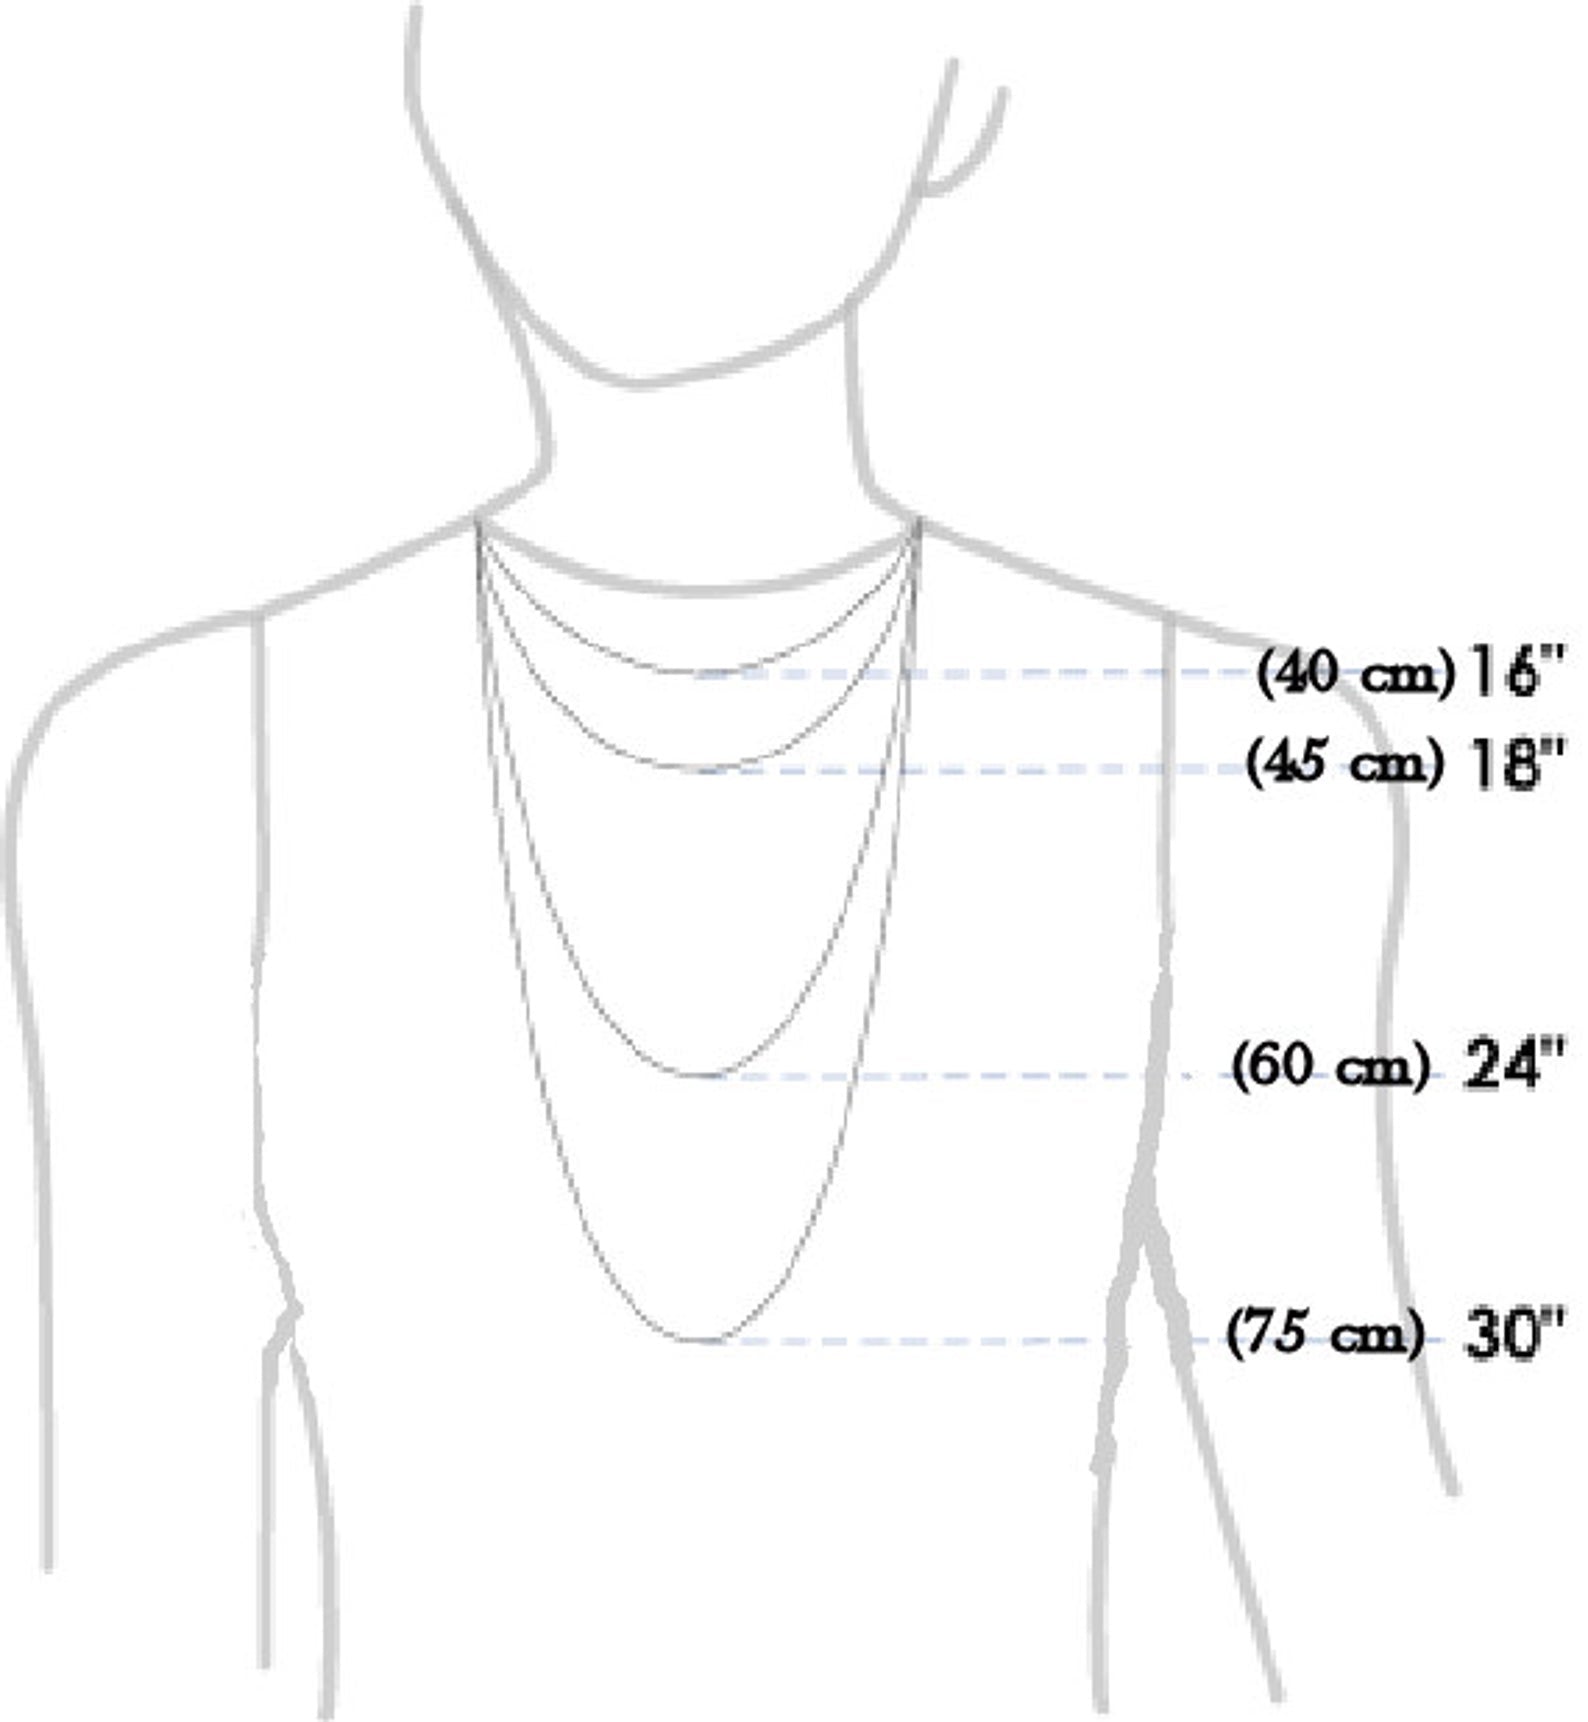 Guide to necklace length in inch and cm